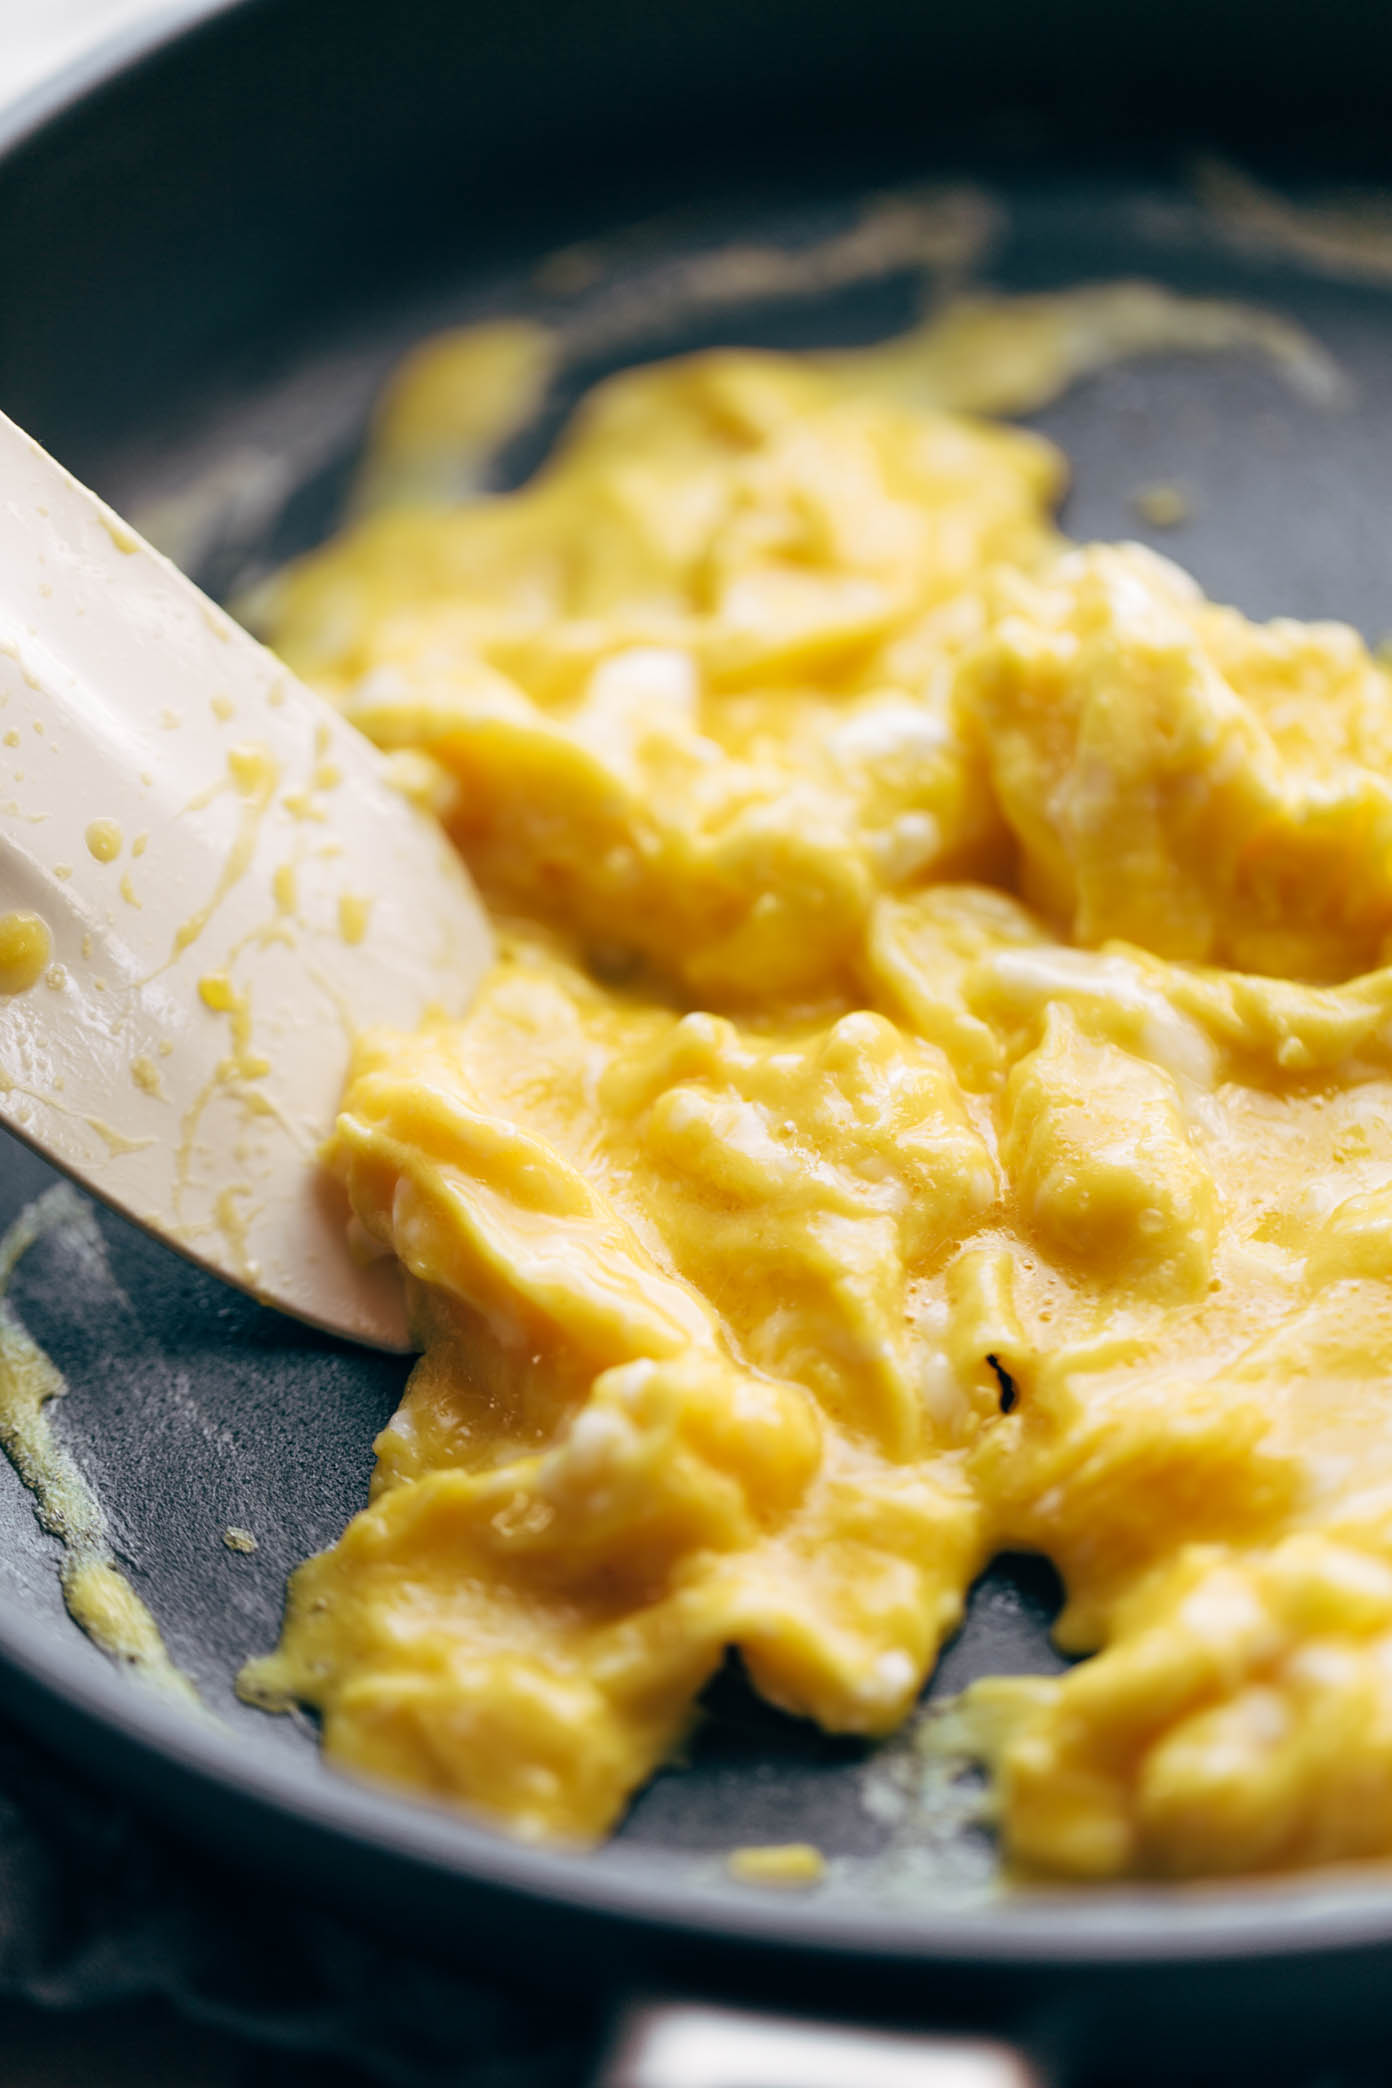 The absolute best soft scrambled eggs of my life! No strange ingredients or methods - just five quick and easy secrets to the best scrambled eggs of your life. | pinchofyum.com